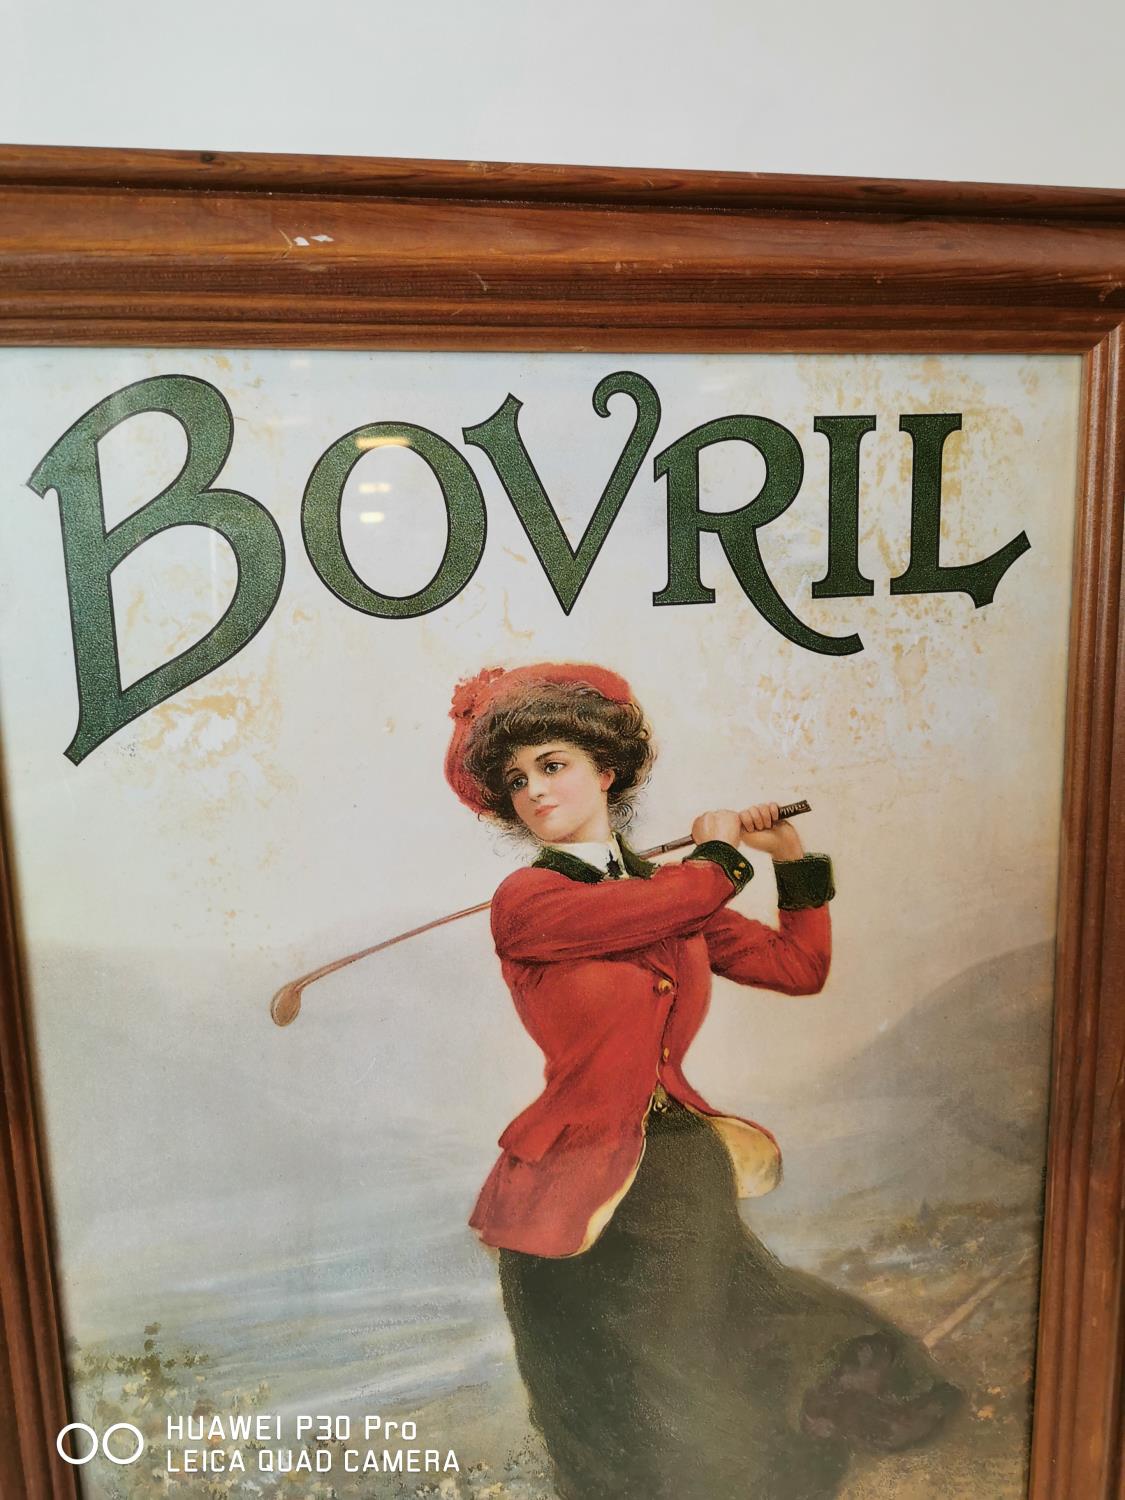 Bovril For Health Strenght and Beauty advertising print. - Image 2 of 2